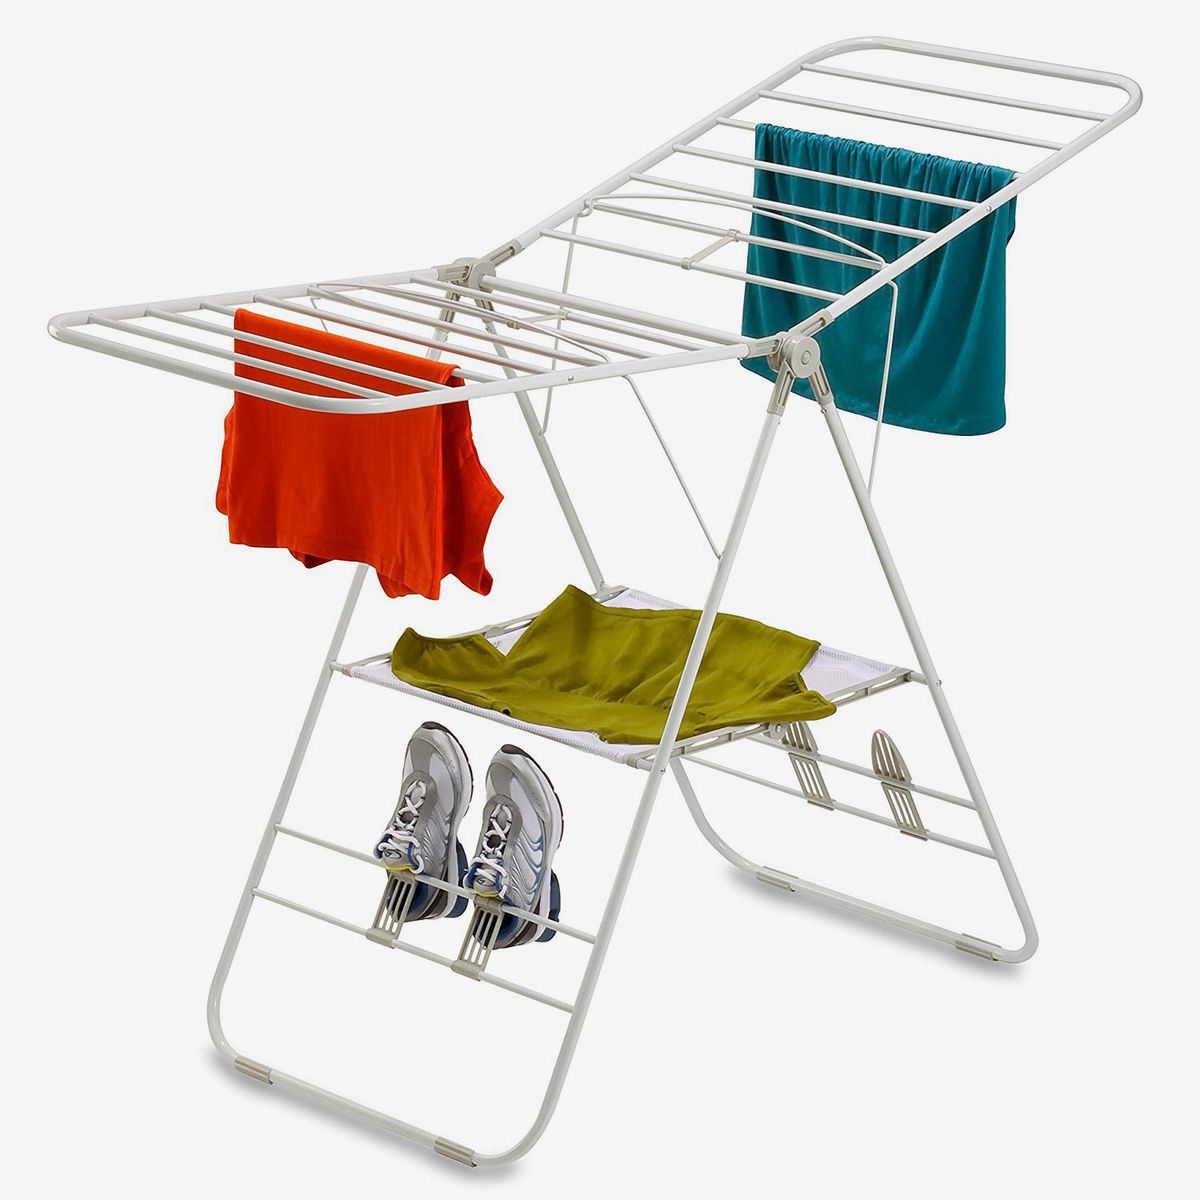 Underwears Square, 40-Clips Drying Towels and Baby Clothes Suitable for Socks Stainless Steel Laundry Hanging Rack for Balcony and Courtyard JAUREE Clothes Drying Rack